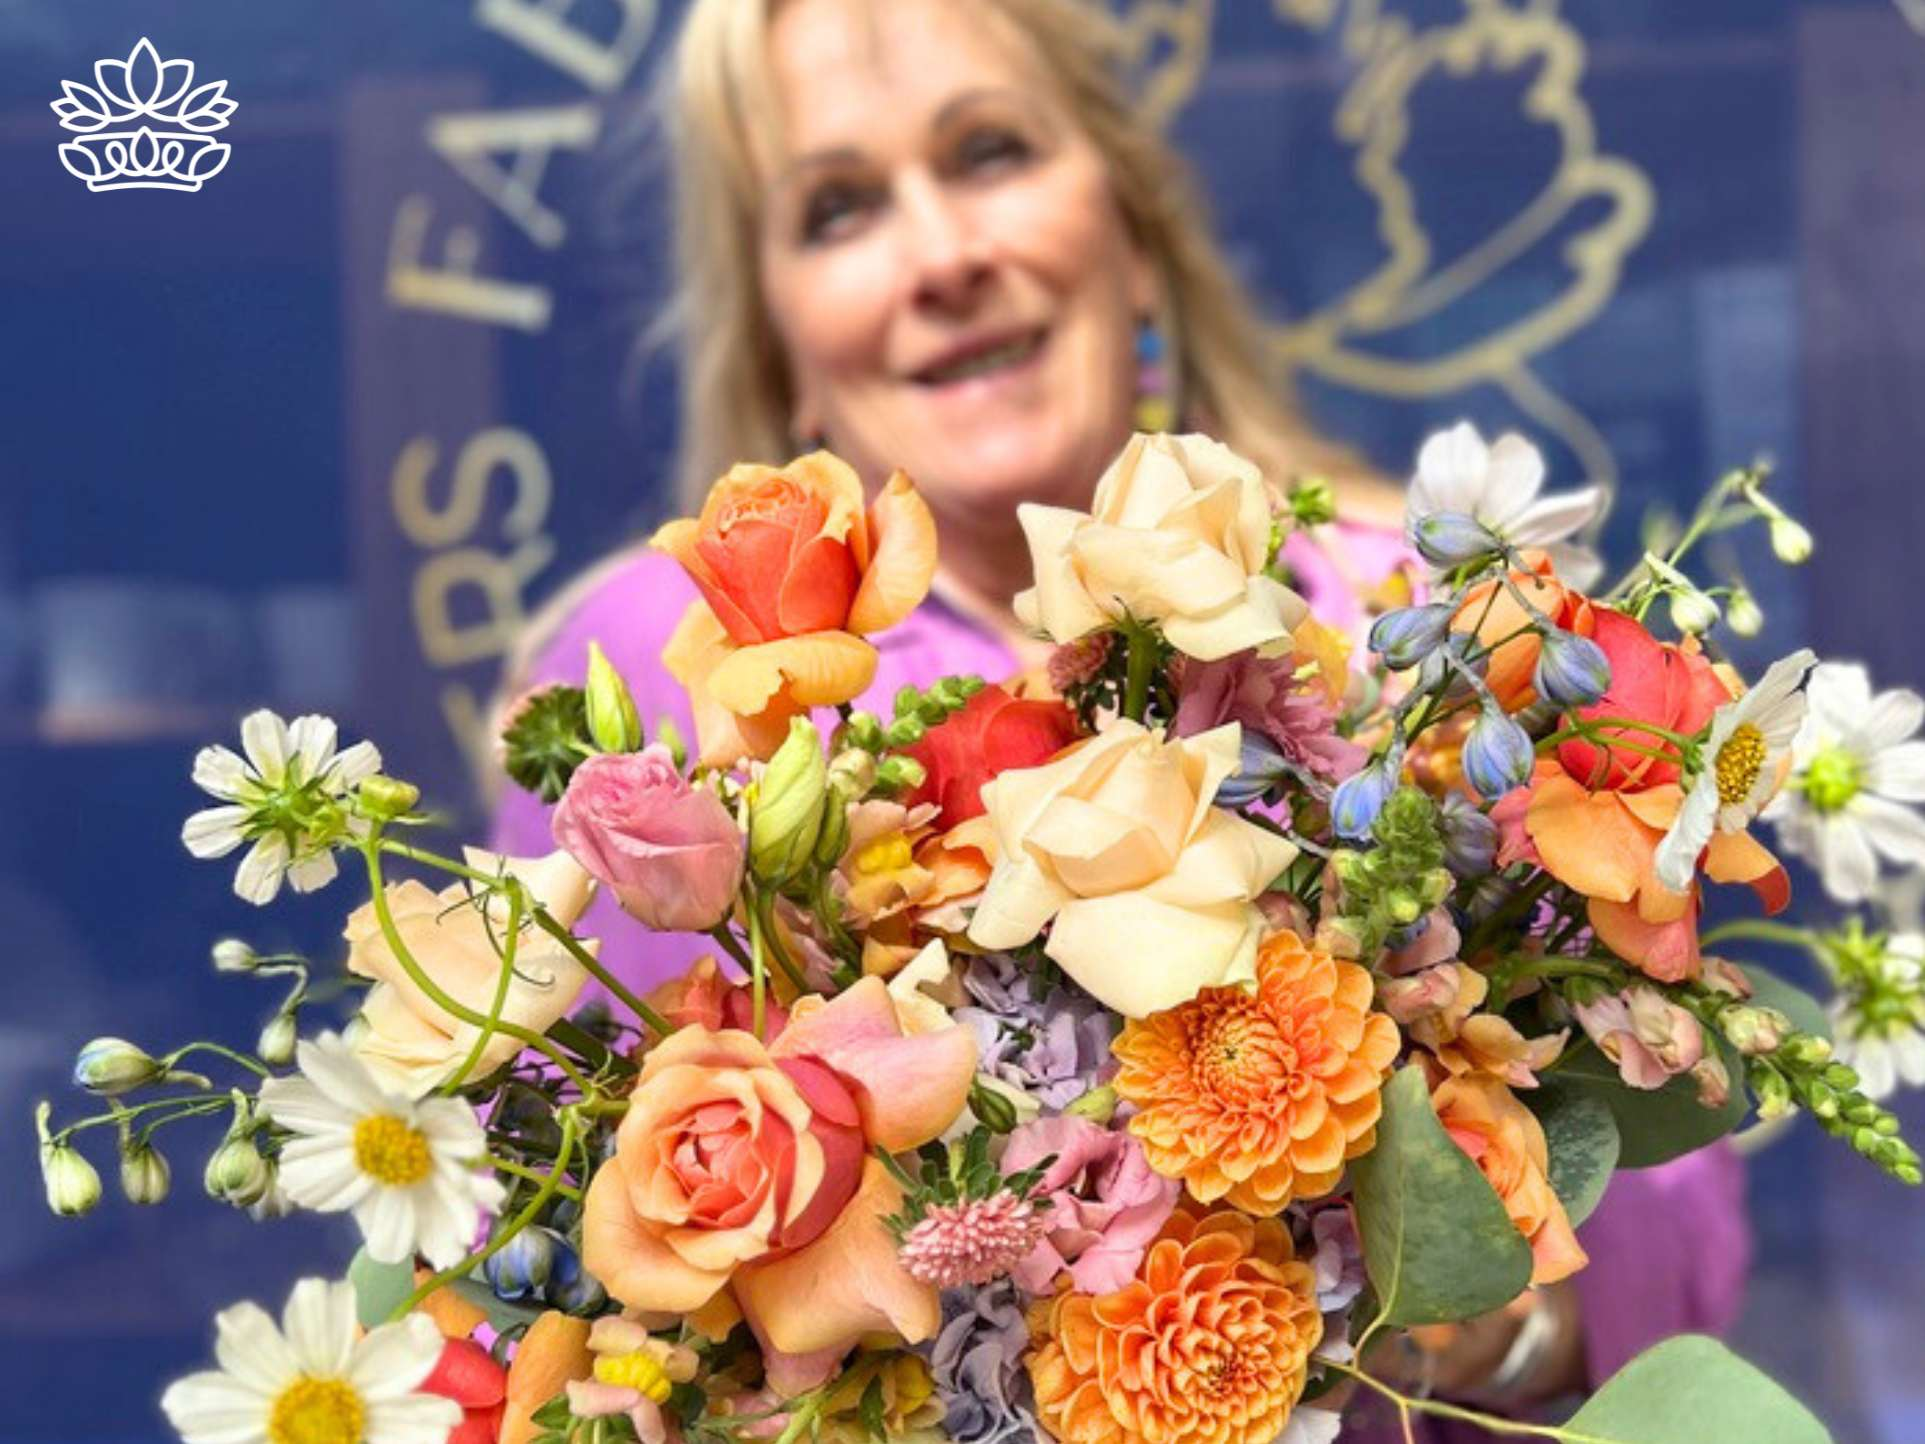 A beaming woman in a vibrant outfit, cradling a lush bouquet of assorted flowers, radiates happiness against the backdrop of Fabulous Flowers and Gifts signage.